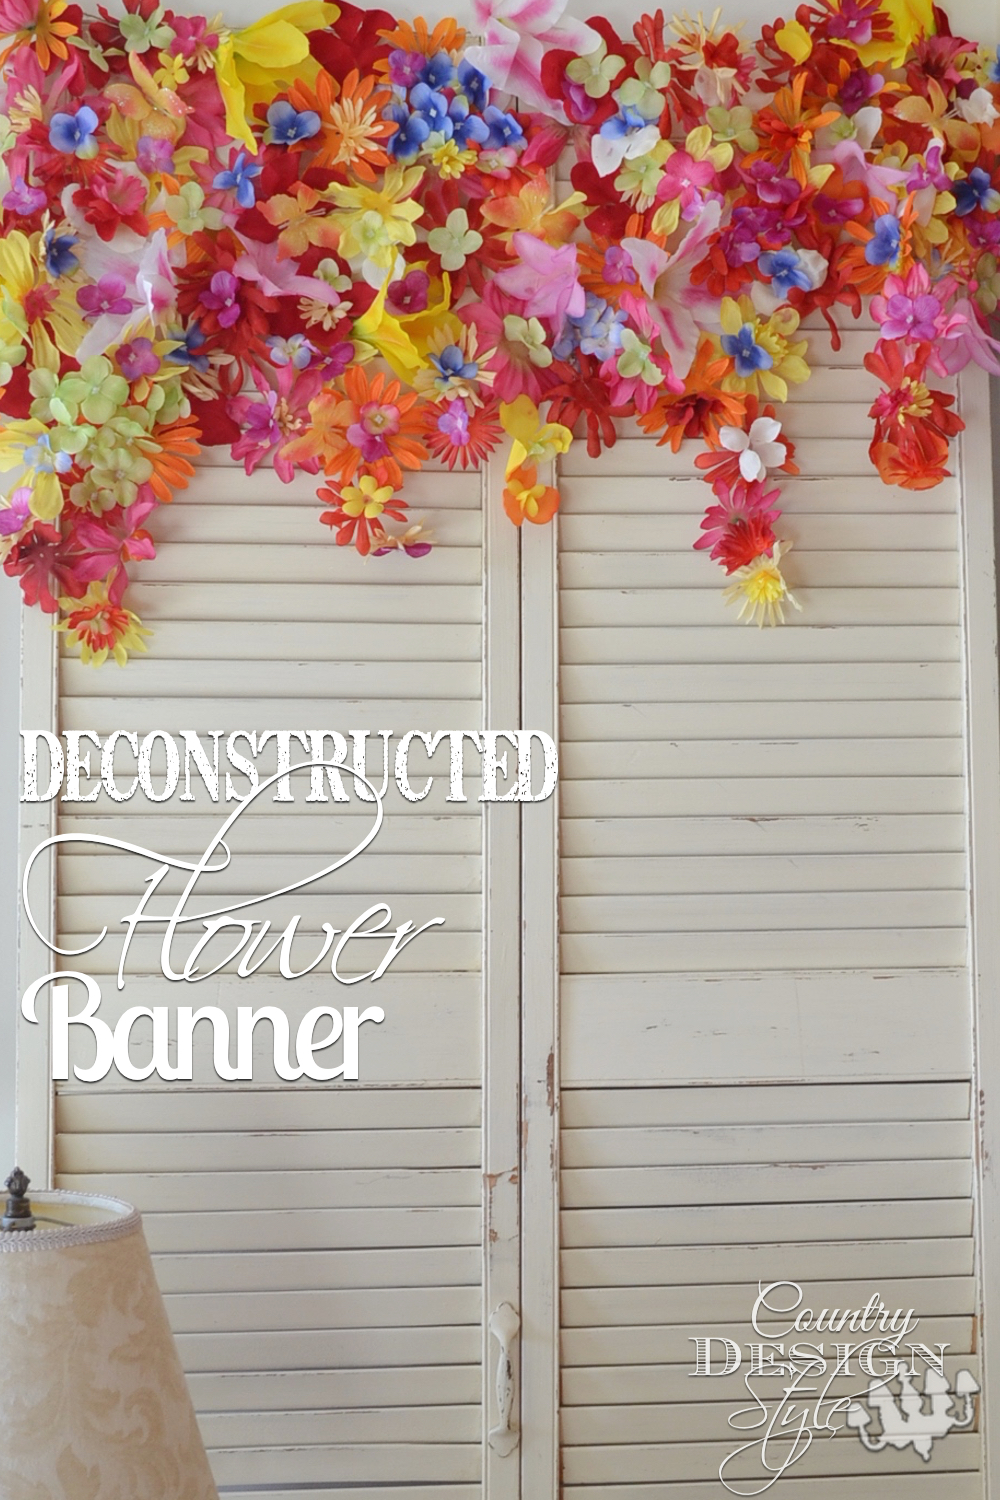 deconstructed-flower-banner-country-design-style-pn